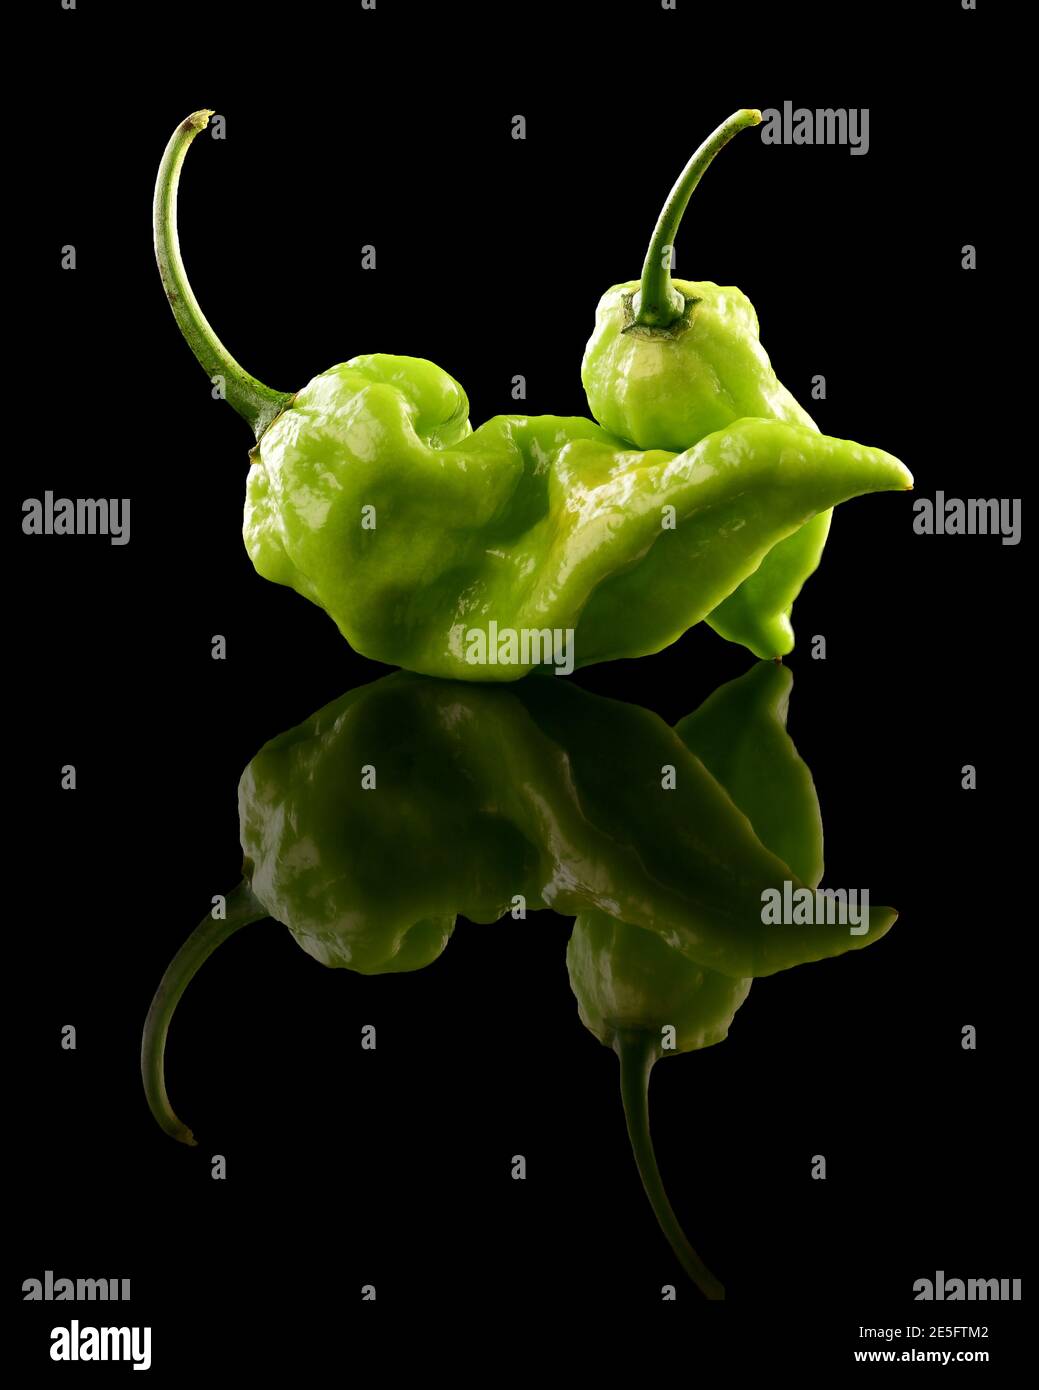 Ripe and green very hot ghost pepper on black background Stock Photo